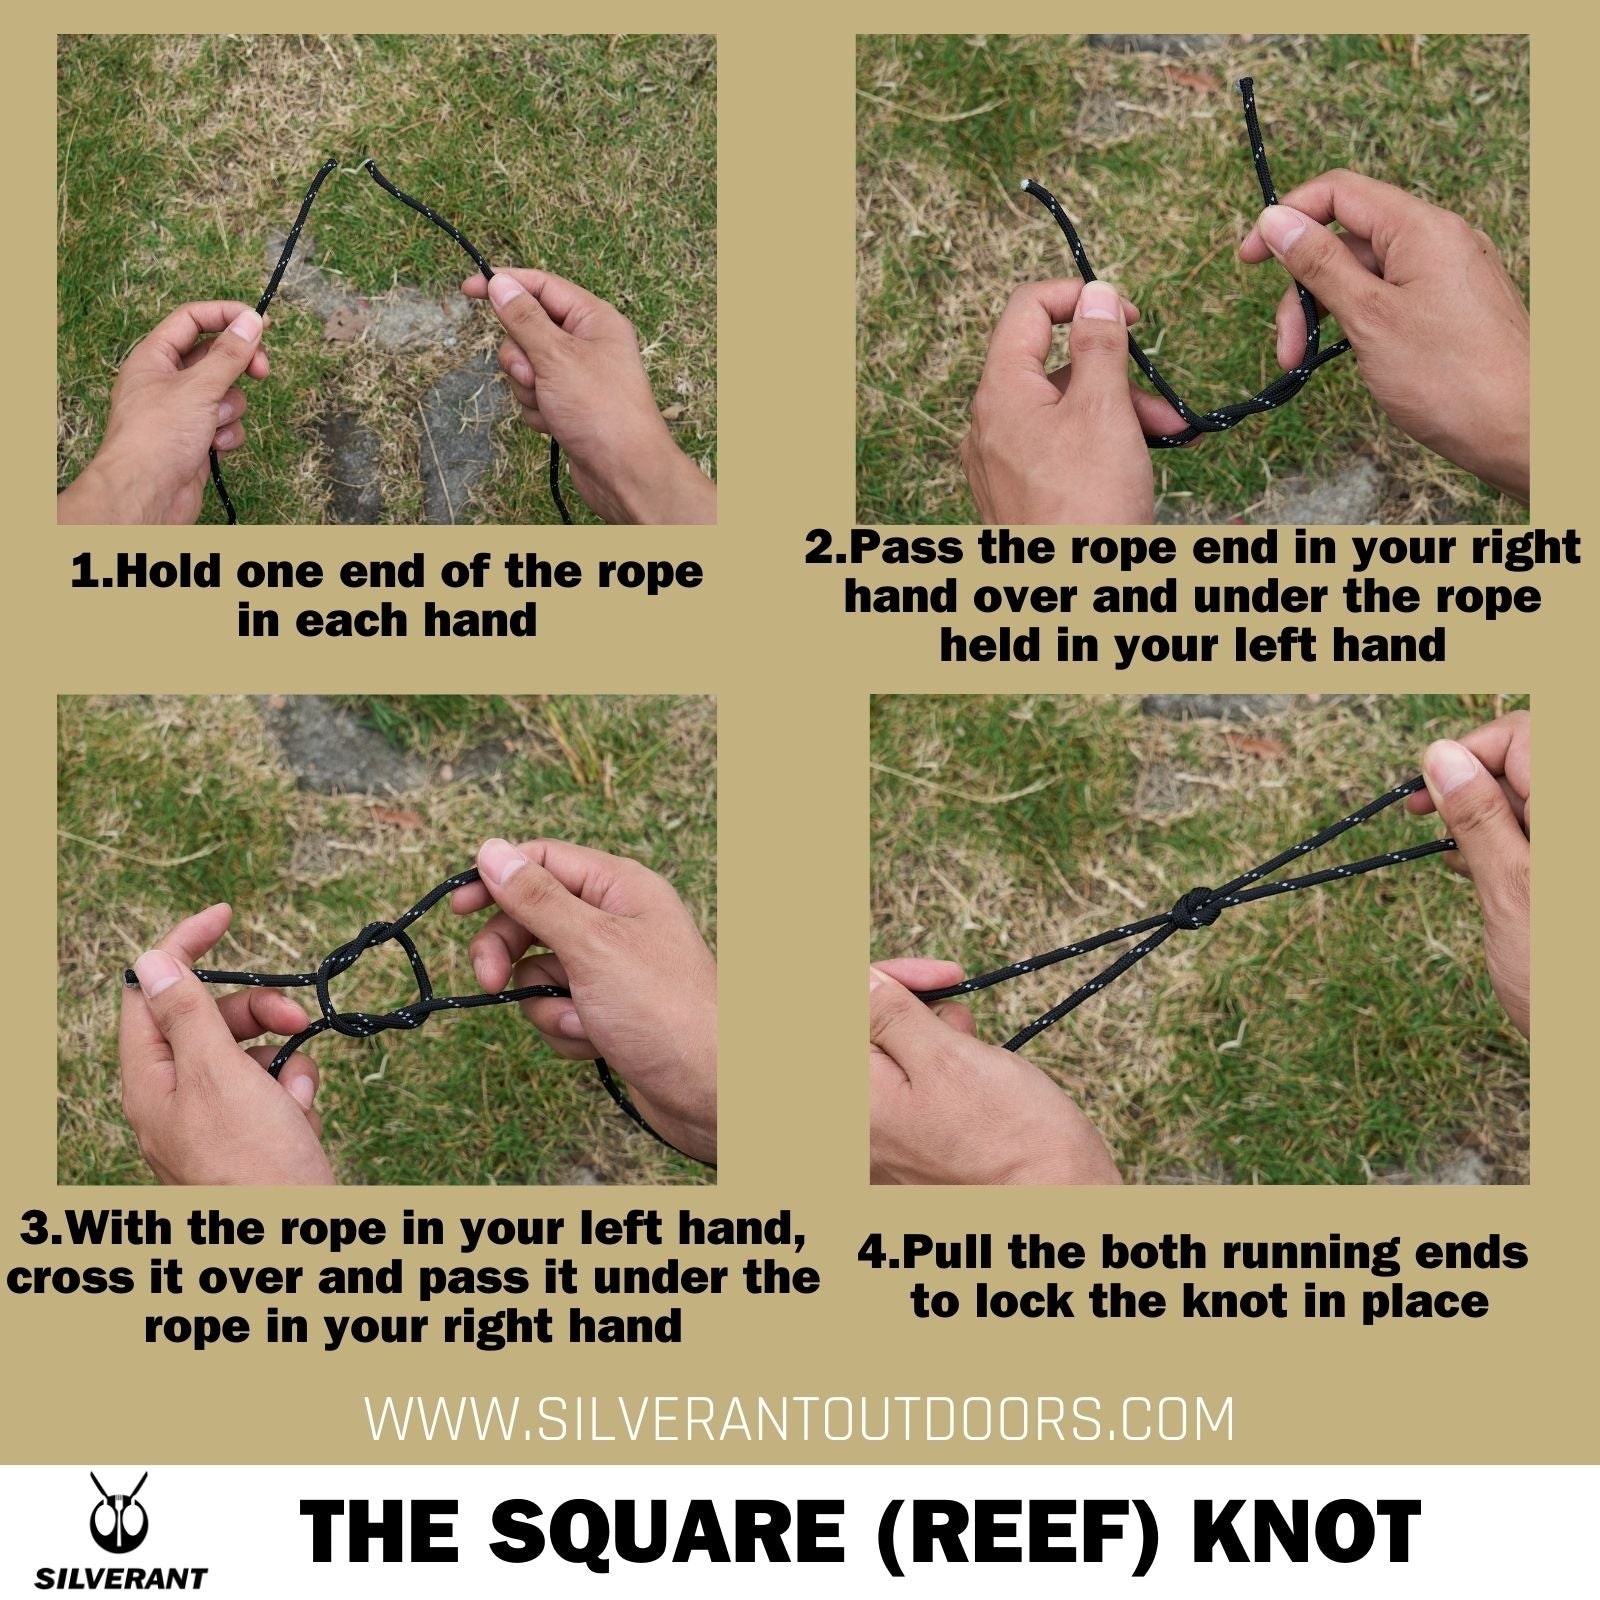 The Square (Reef) Knot